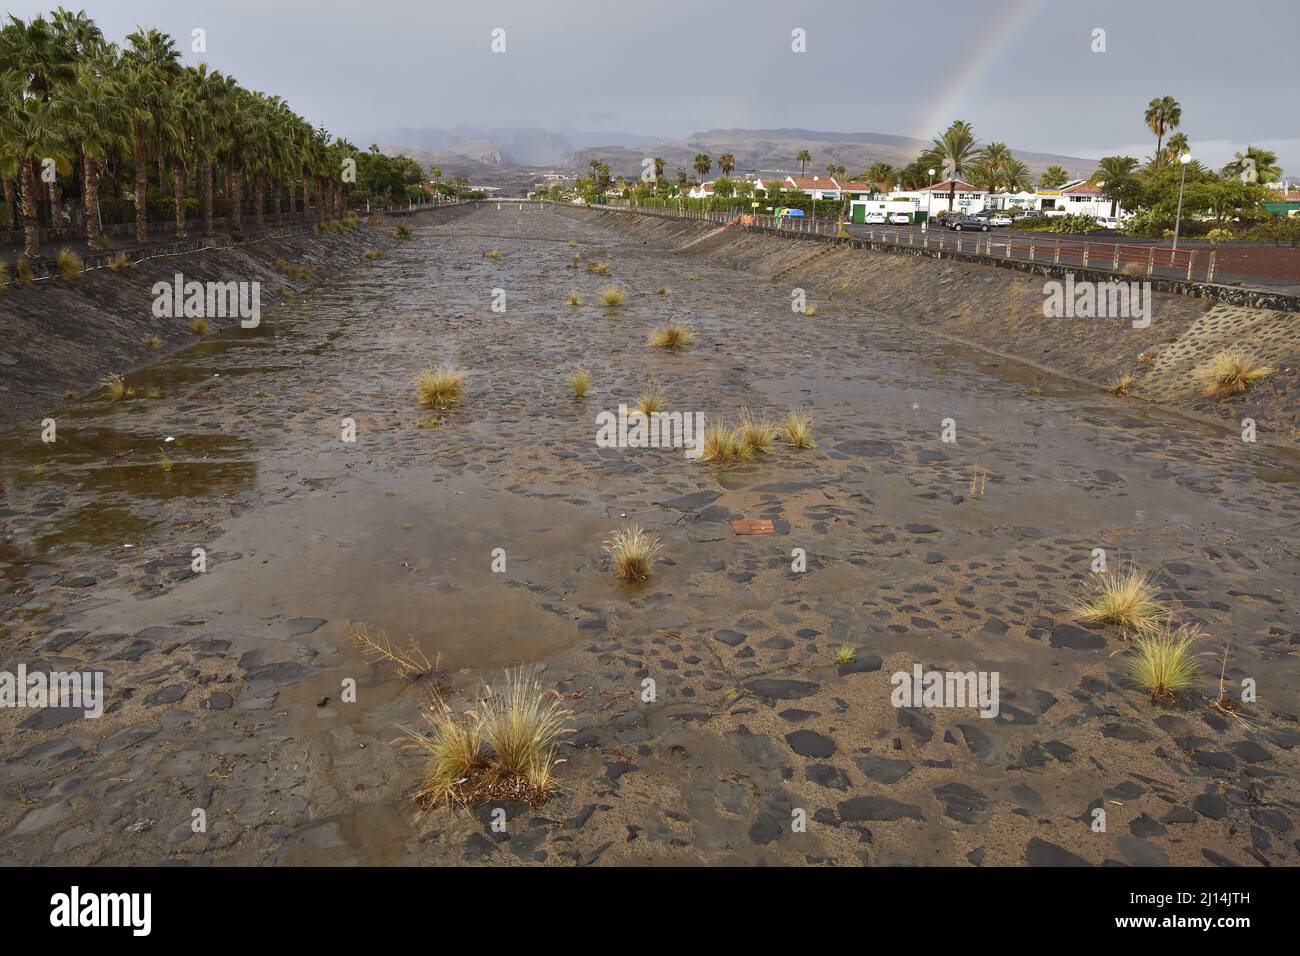 Dry riverbed, rainy weather in Maspalomas, south of Gran Canaria Canary Islands Spain. Stock Photo